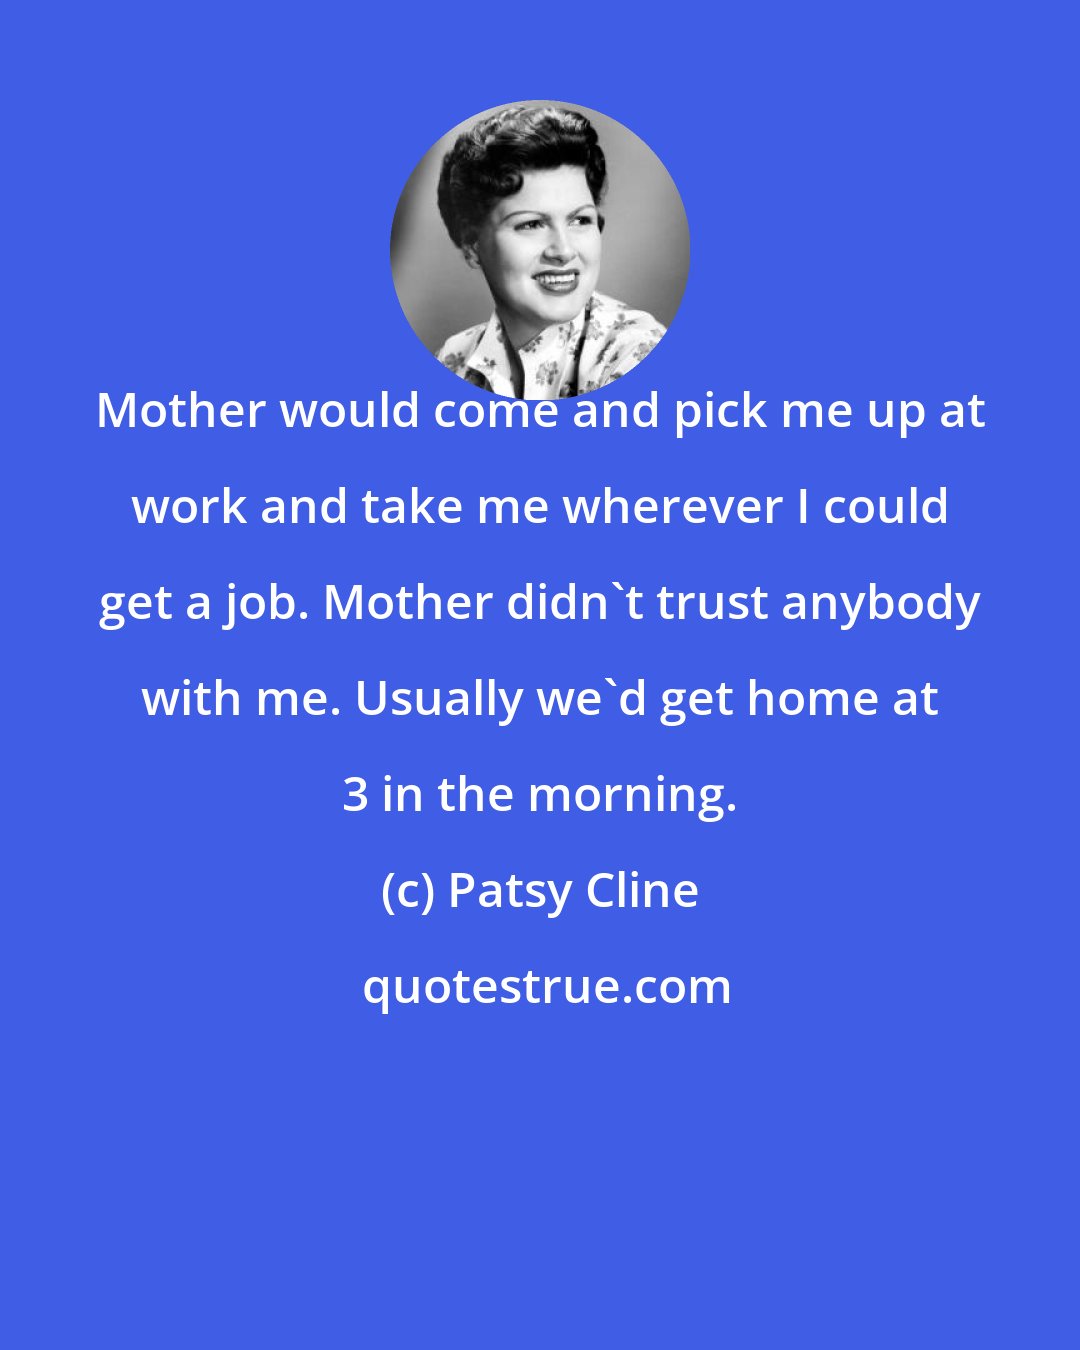 Patsy Cline: Mother would come and pick me up at work and take me wherever I could get a job. Mother didn't trust anybody with me. Usually we'd get home at 3 in the morning.